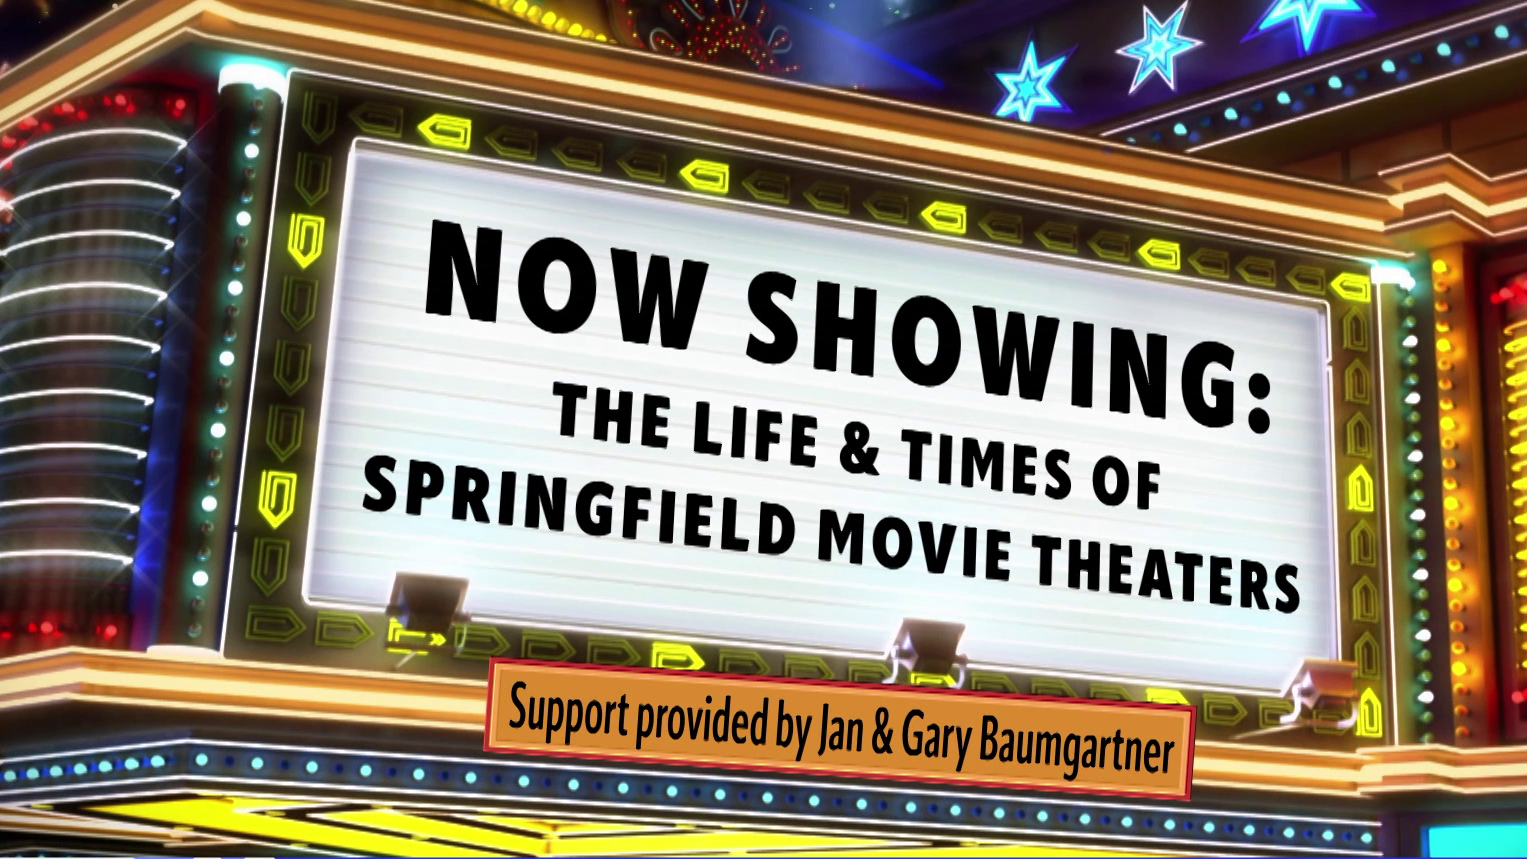 "Now Showing – The Life and Times of Springfield Movie Theaters" on an advertisement.